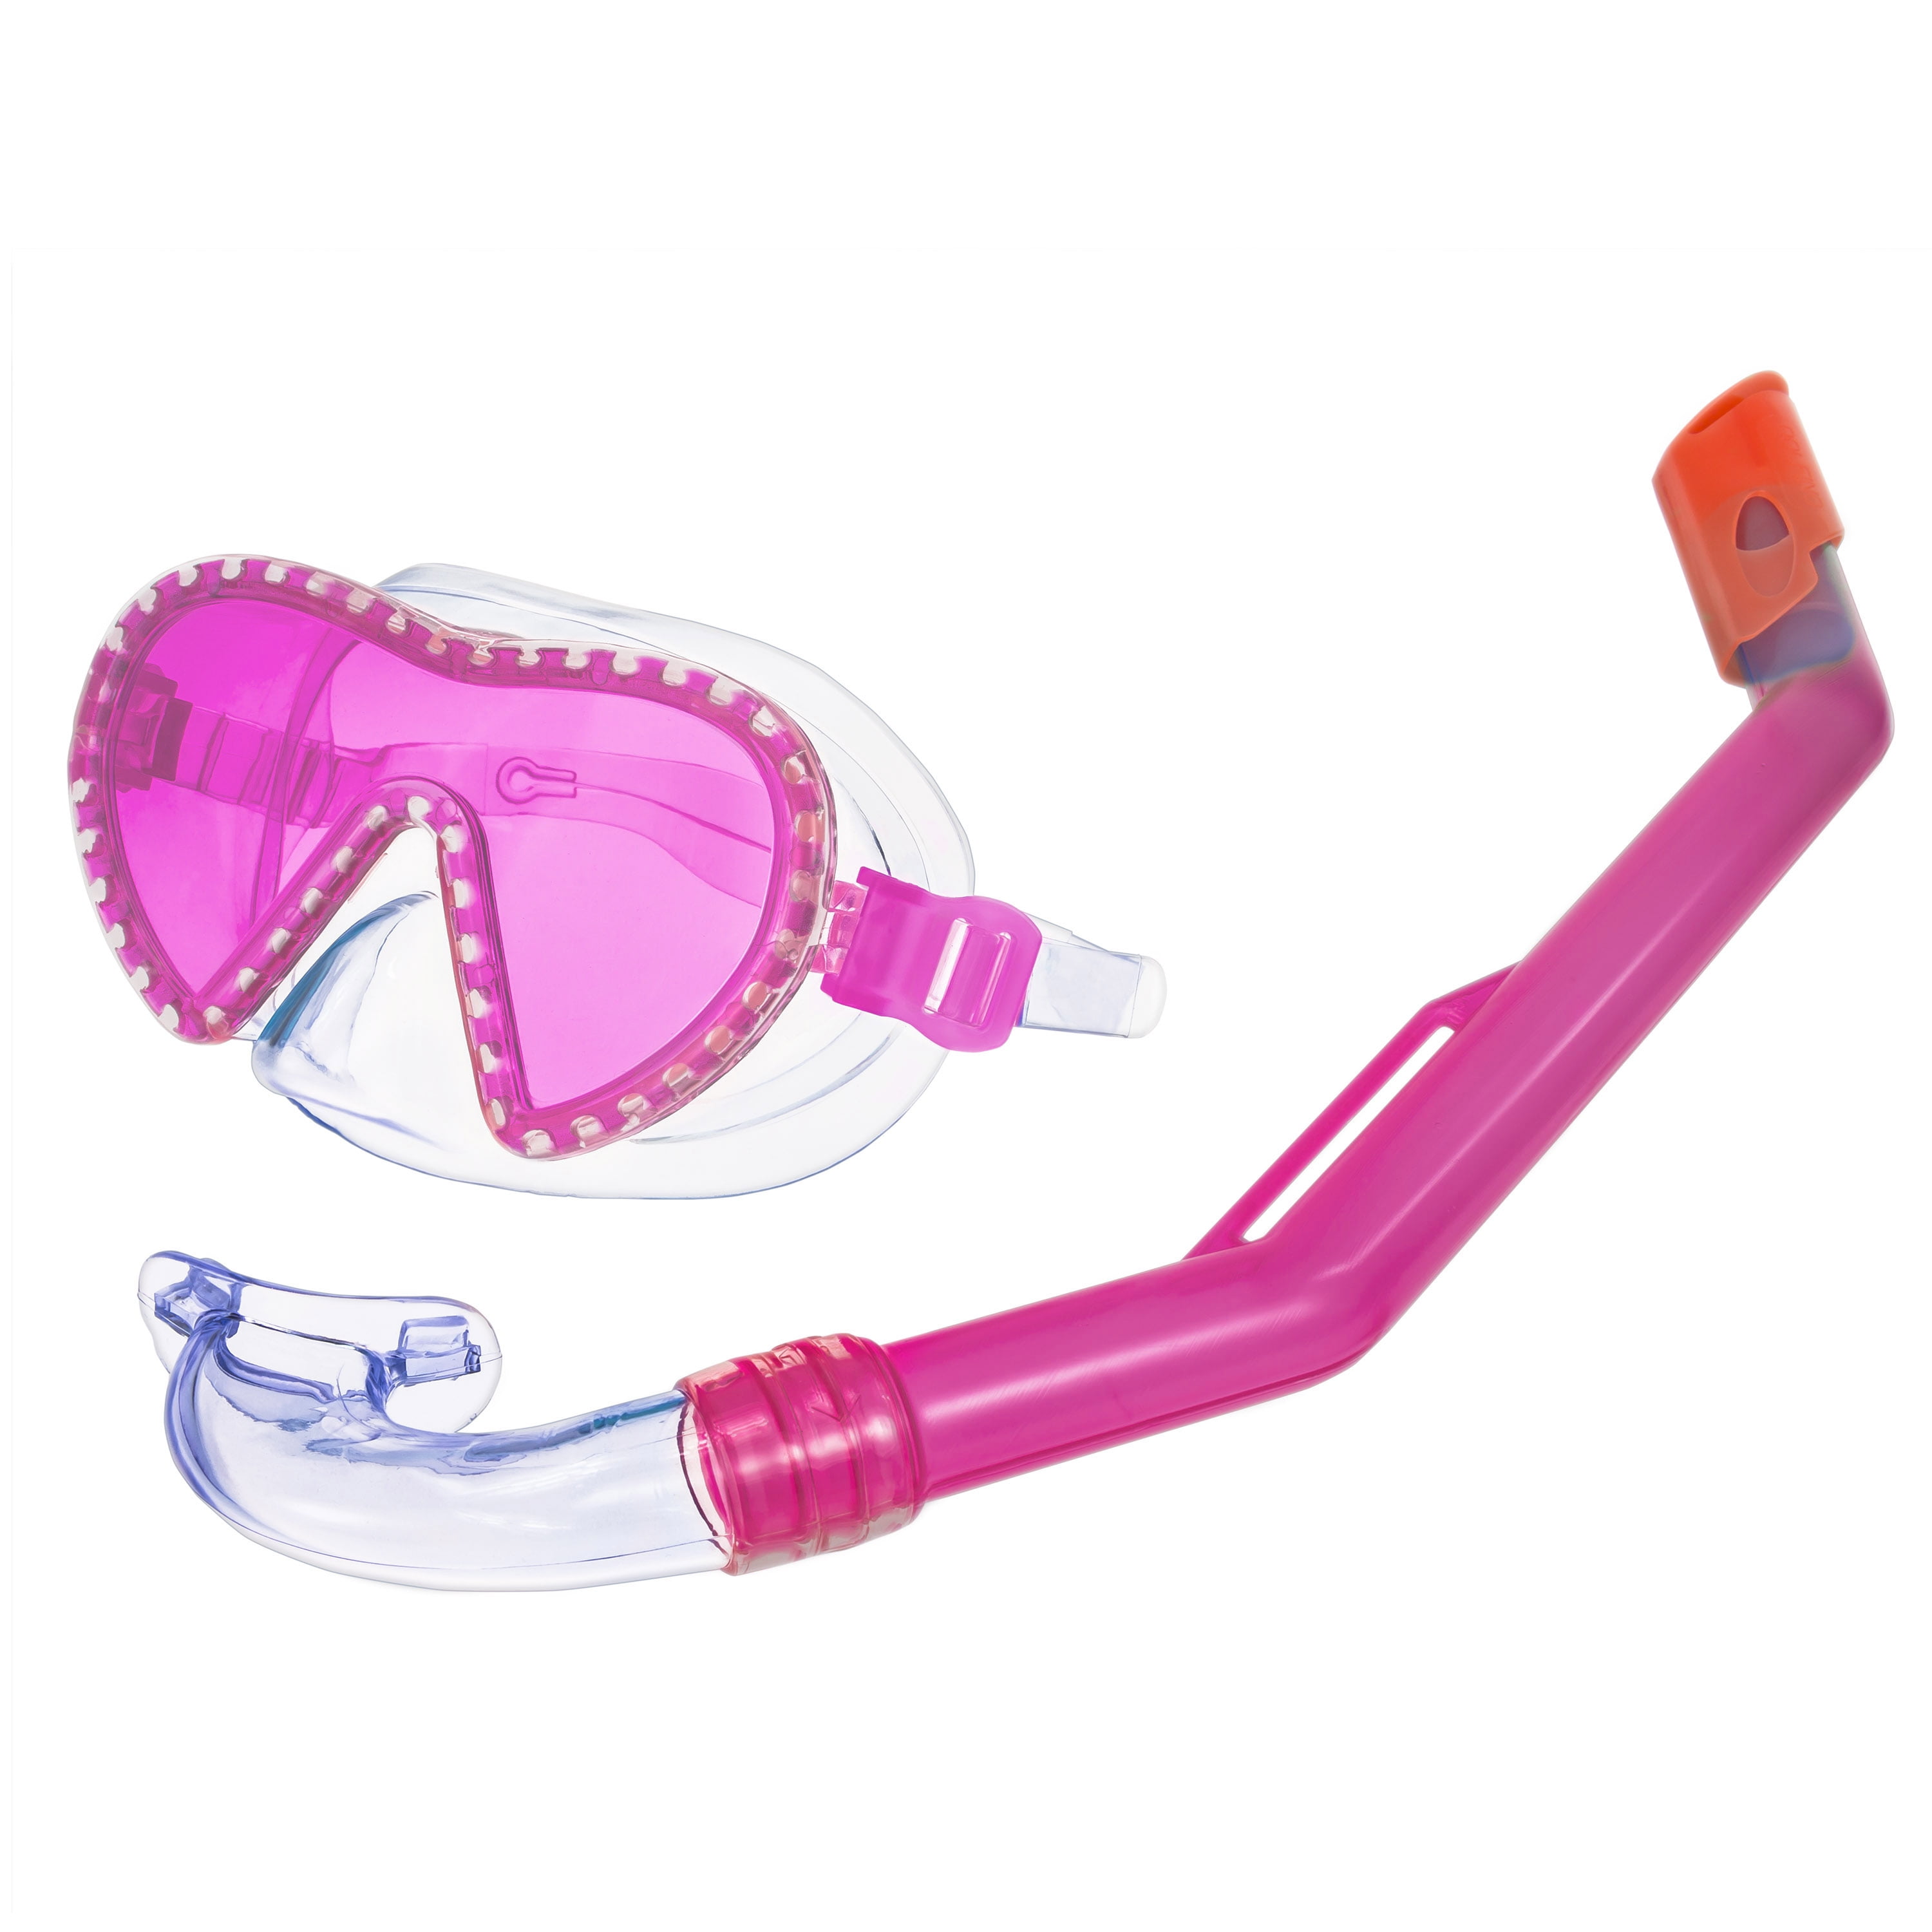 DOLFINO PINK CHILD SWIN MASK LATEX FREE POLY CARBONATE LENS PINK COLOR 